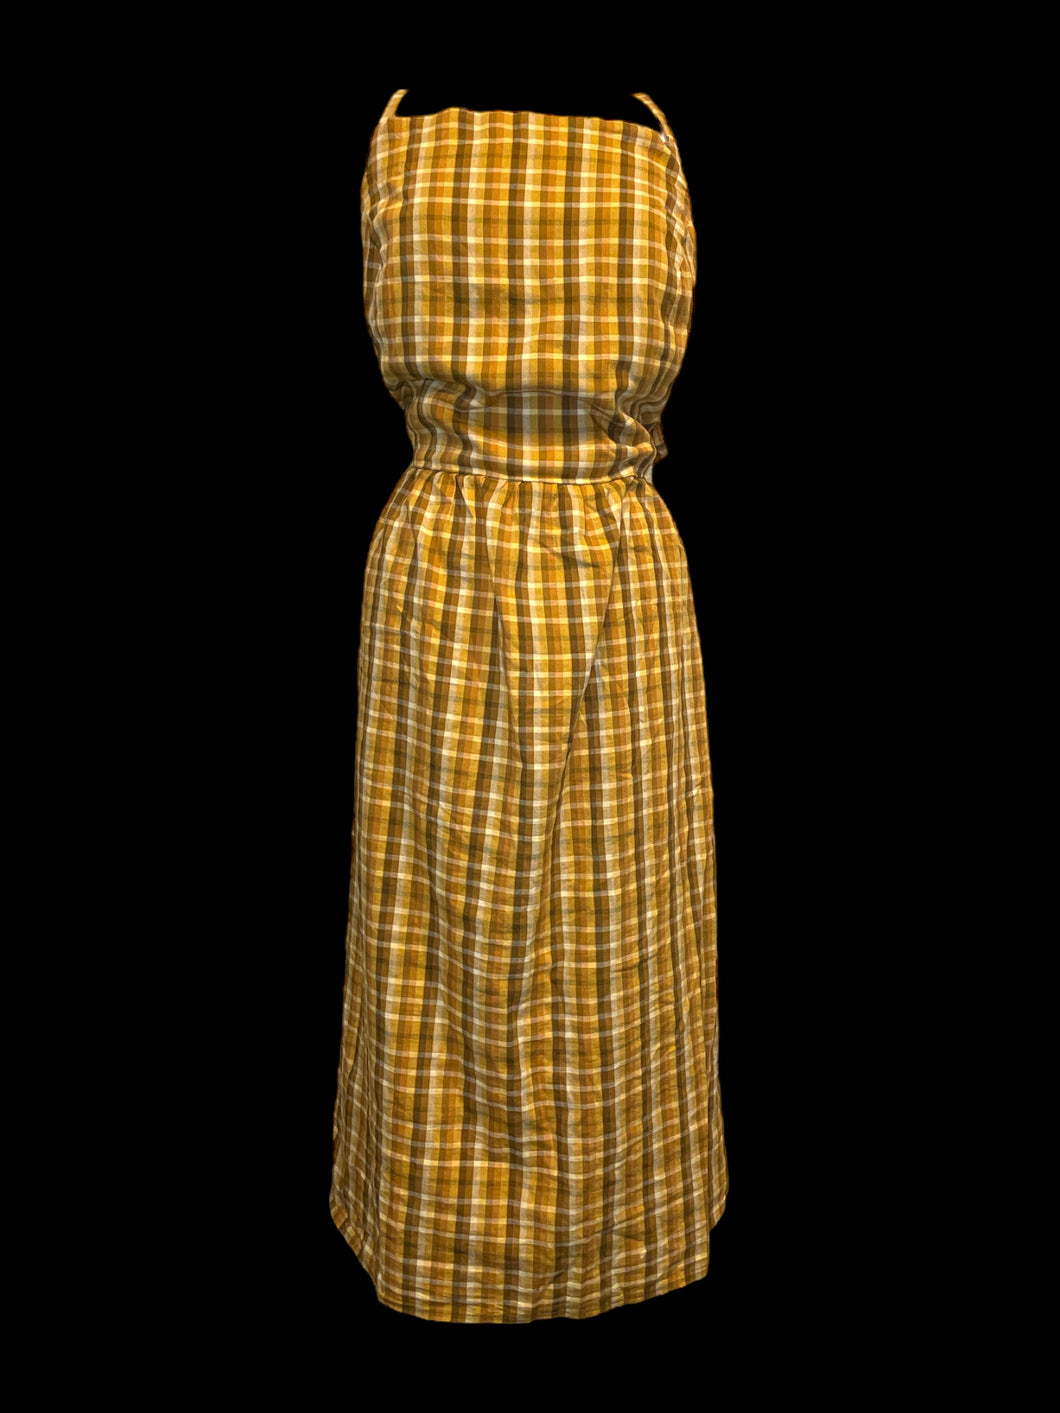 3X Yellow, beige, & brown gingham sleeveless dress w/ adjustable straps, pockets, & shirred back